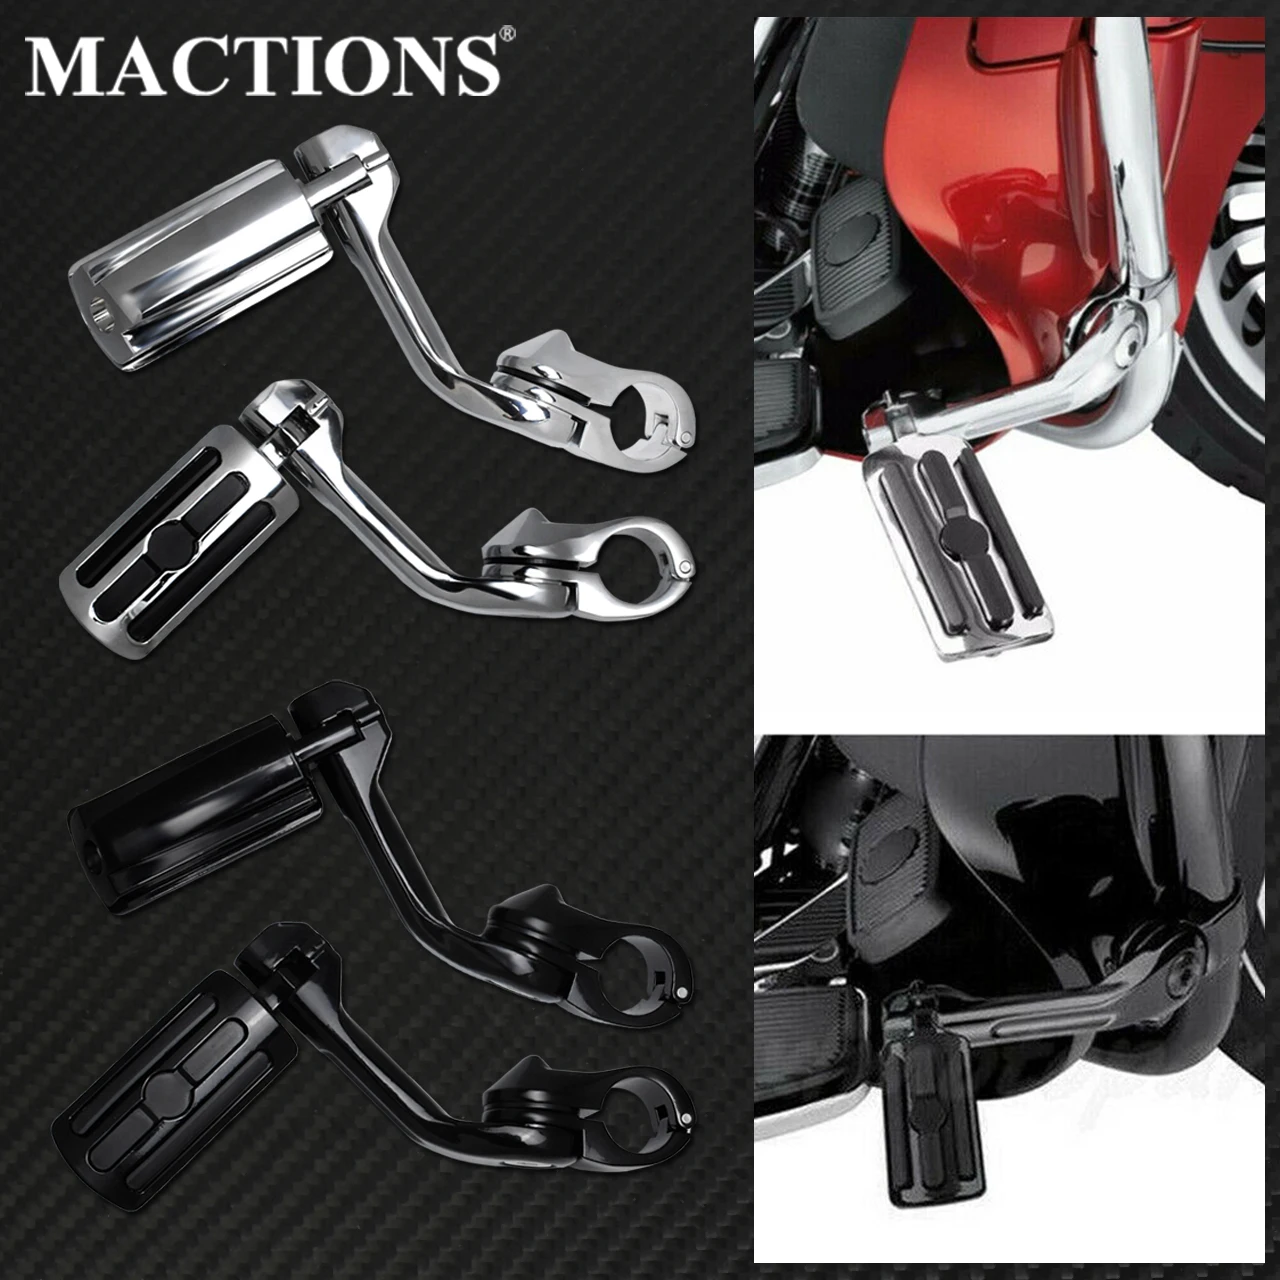 32mm 1.25" Long Angled Clamps Highway Motorcycle Footpegs Mounting Kit Pedels 